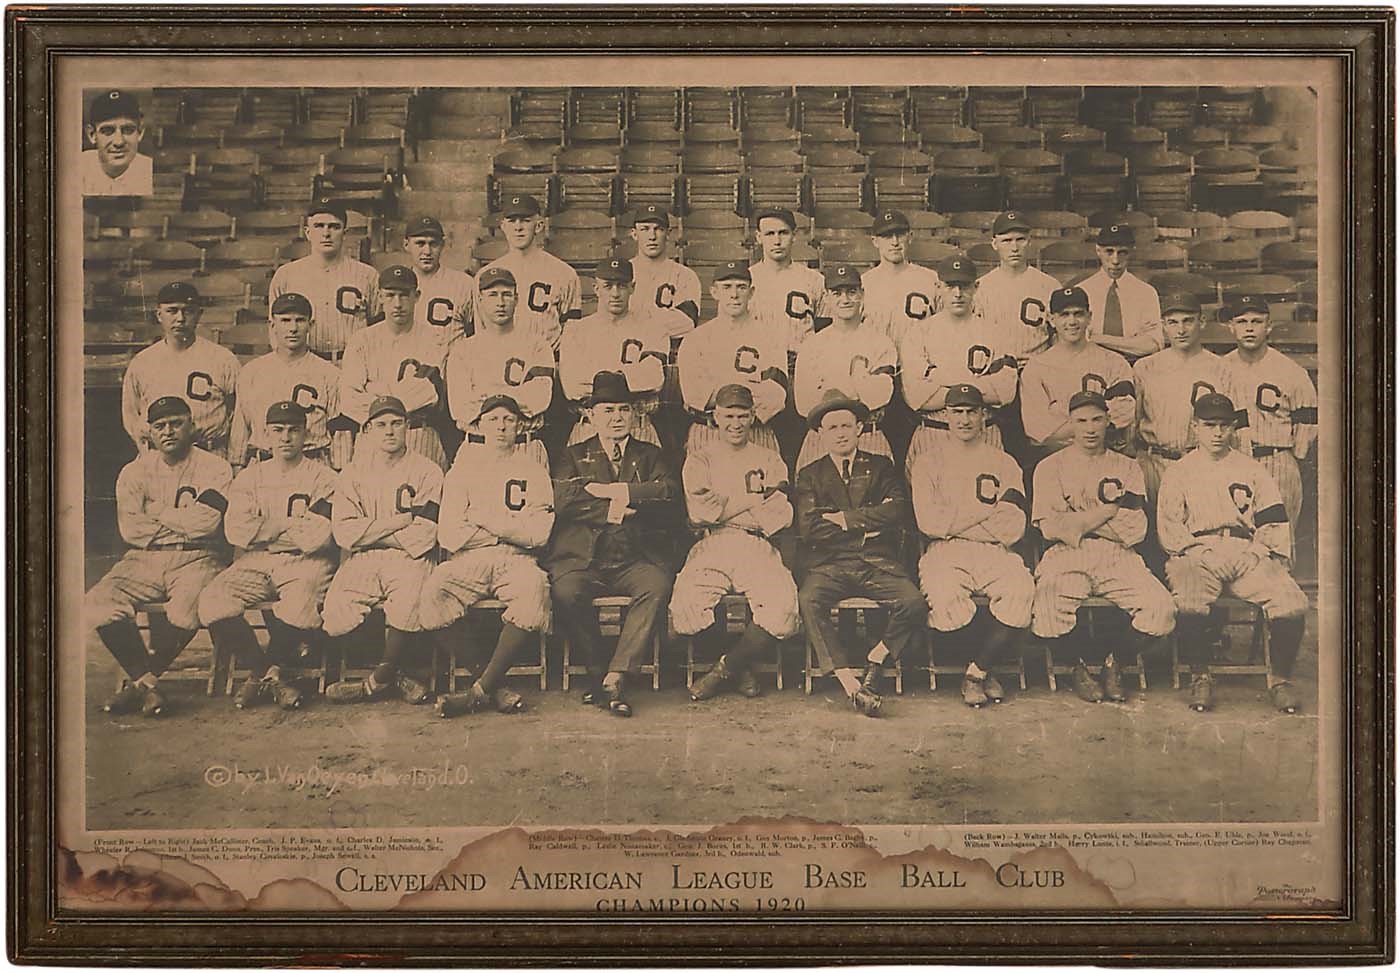 Huge 1920 Cleveland Indians Photograph Presented to "Smoky" Joe Wood